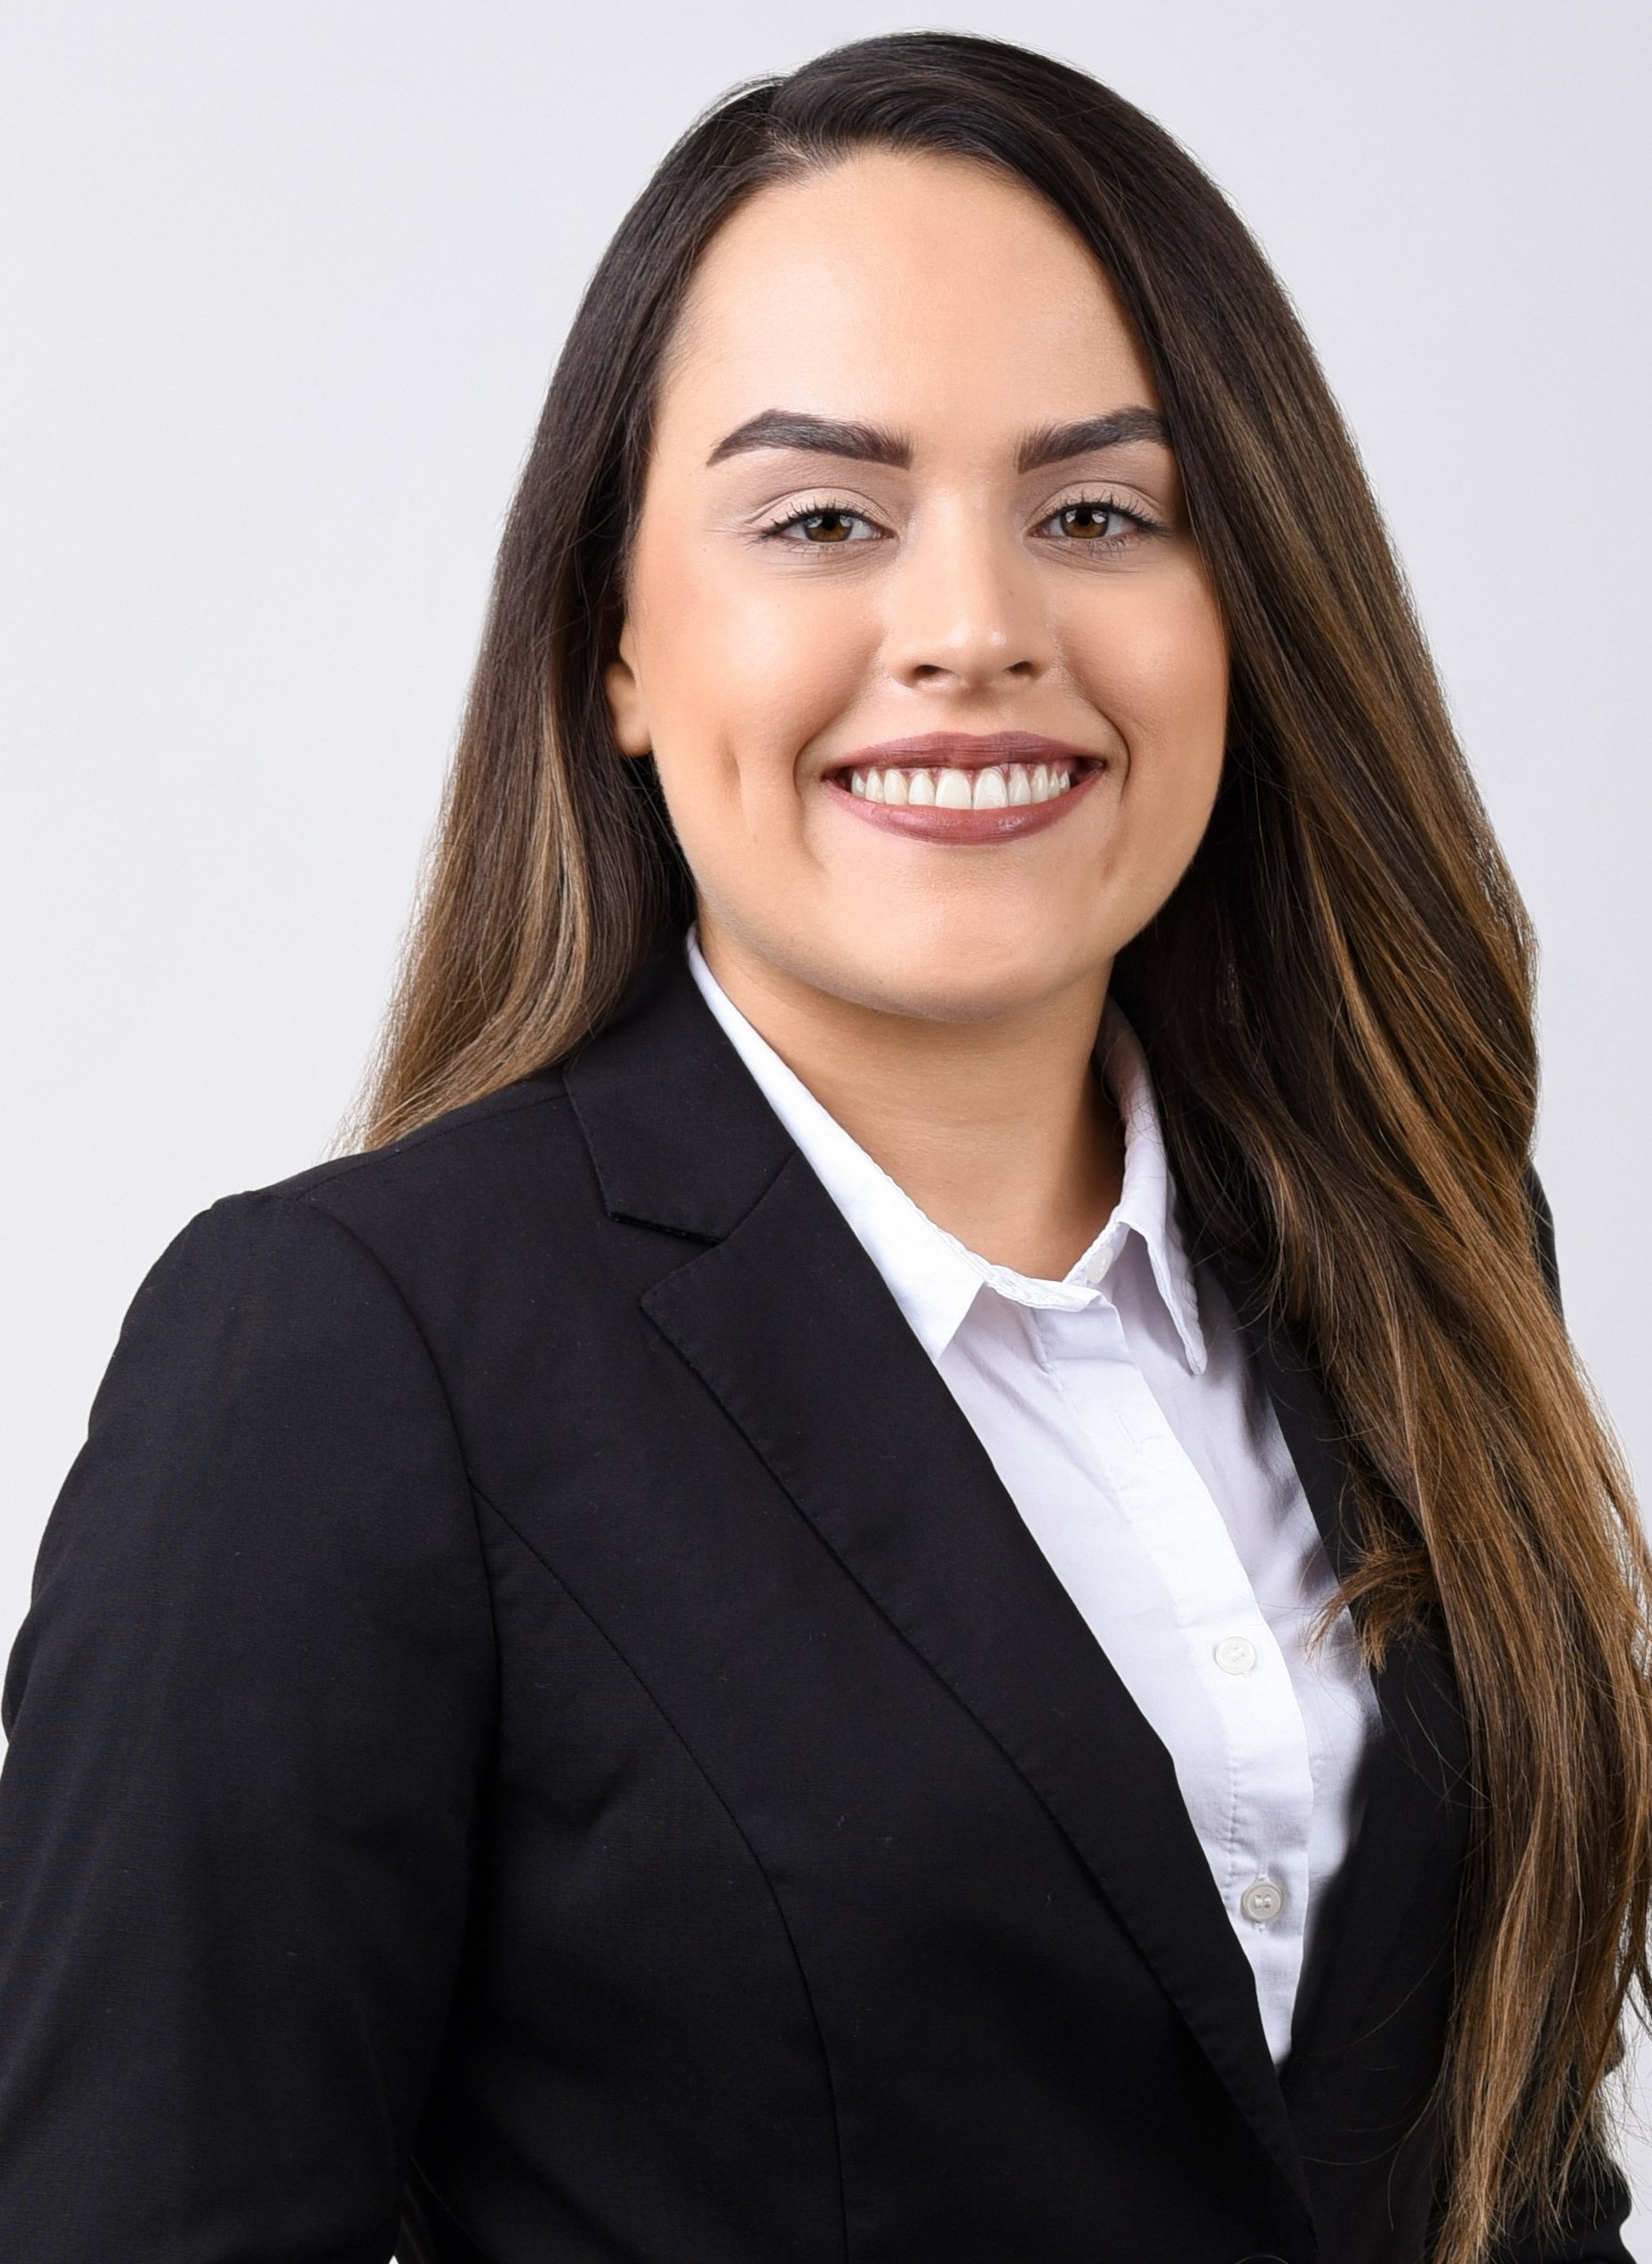 Isabella Ditzler / Head of HR Consulting & Services